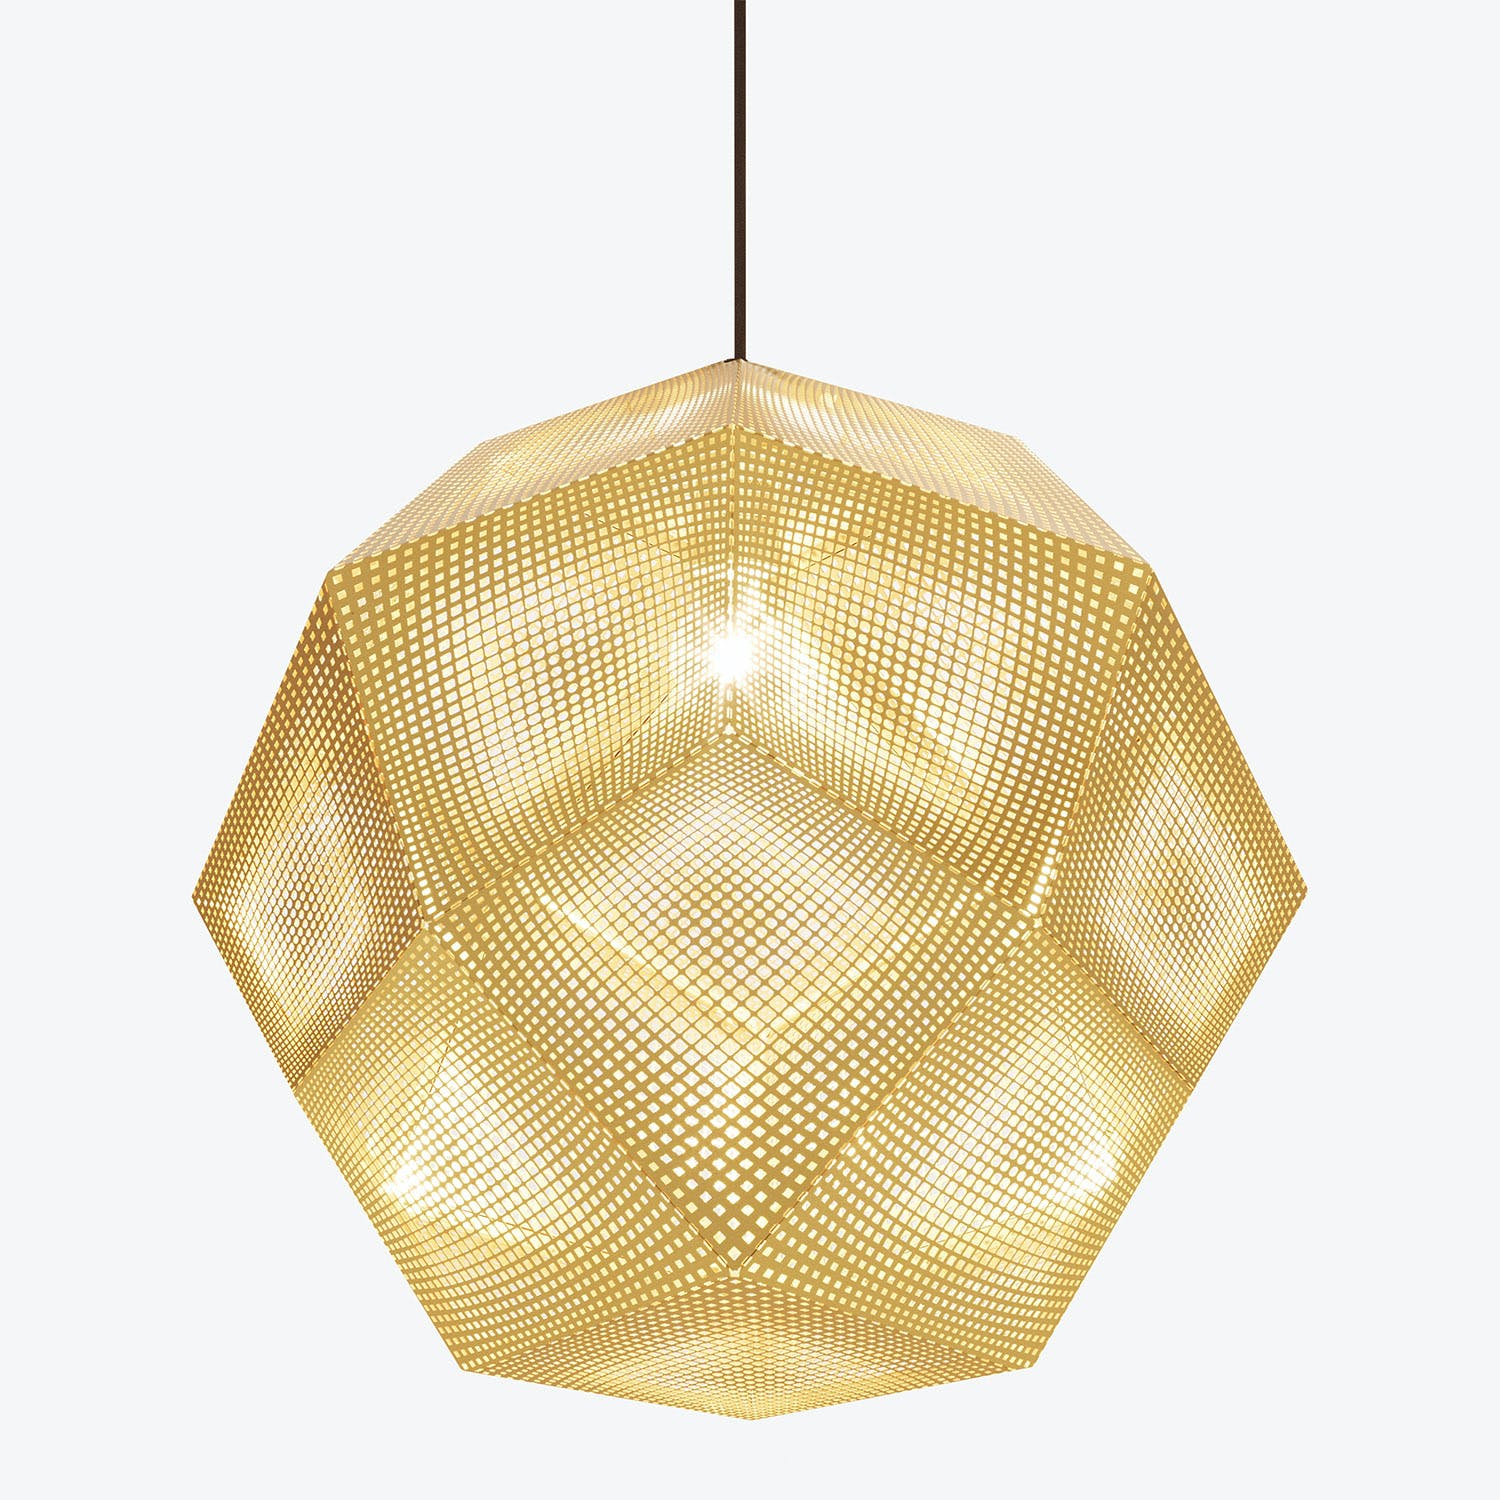 Modern dodecahedron pendant light fixture with intricate geometric design.